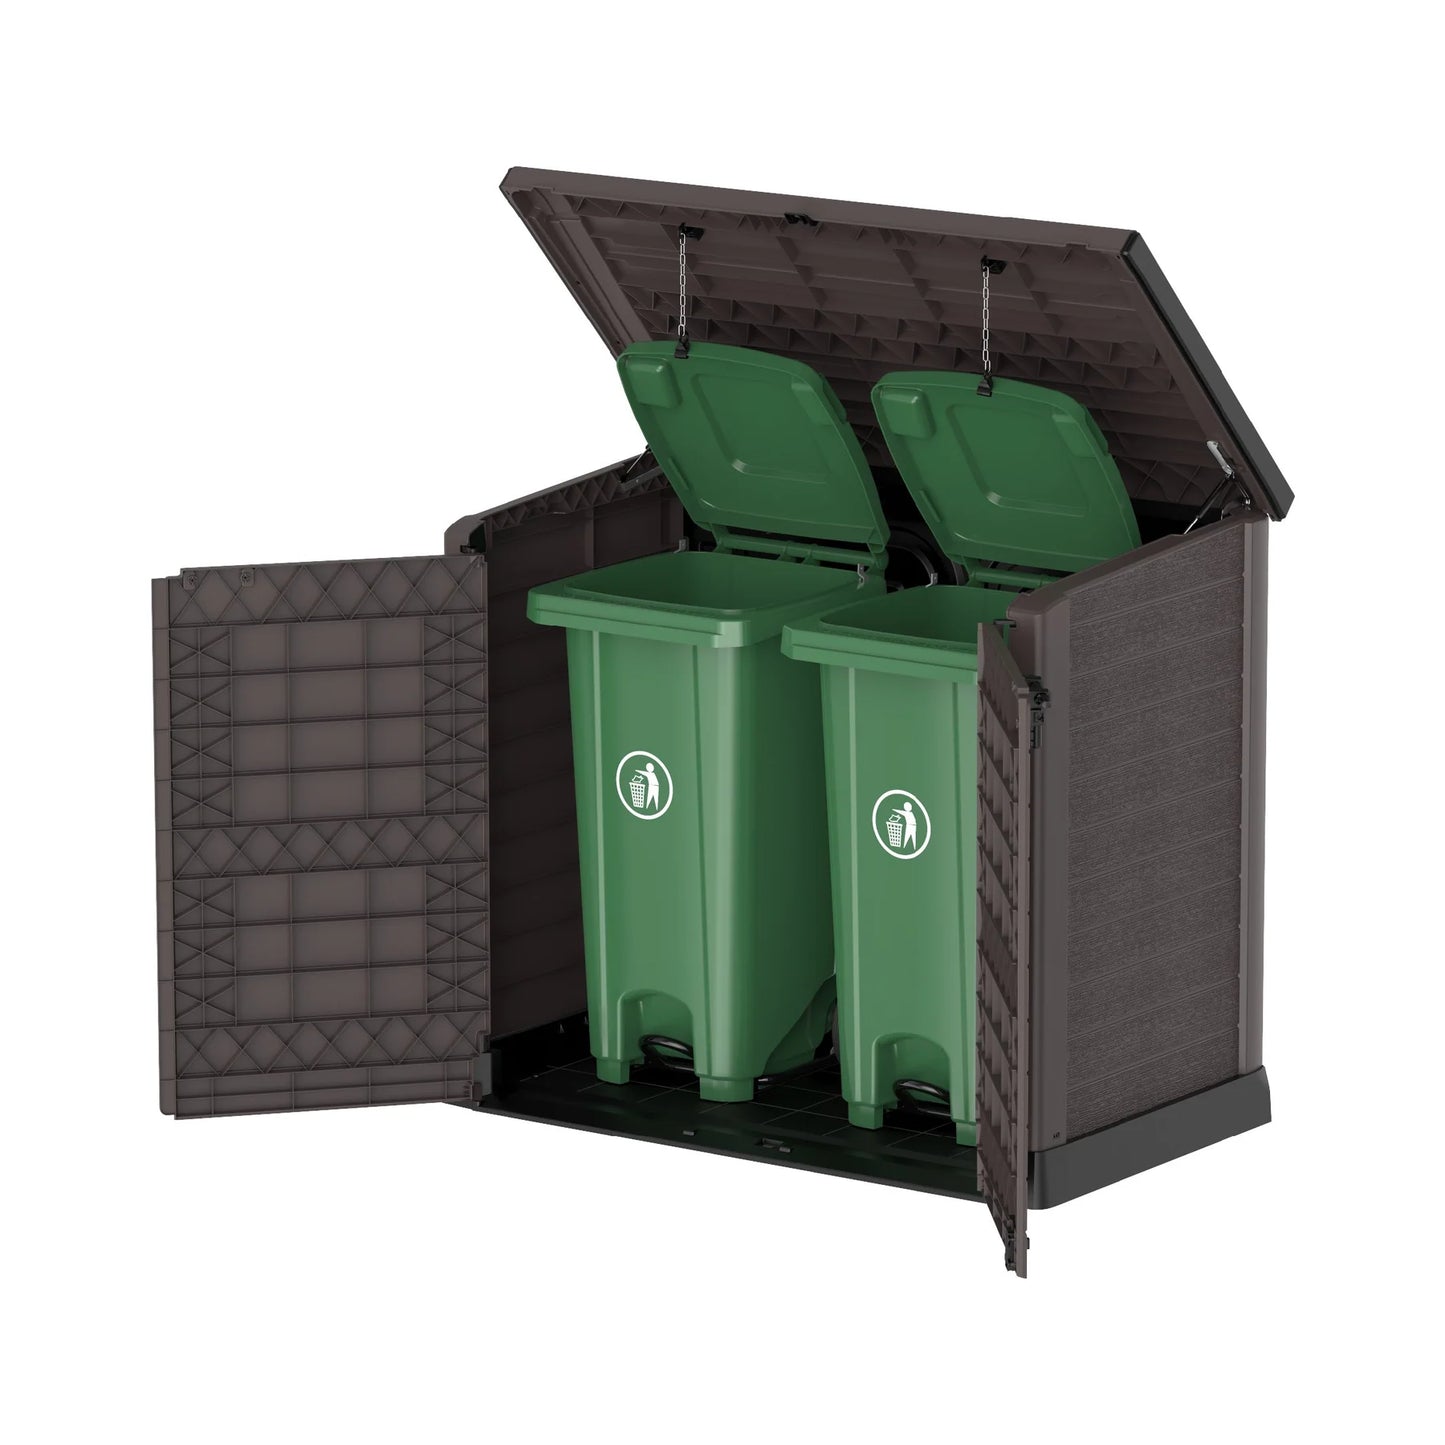 CEDARGRAIN 1200L SMALL STORAGE SHED WITH FLAT LID